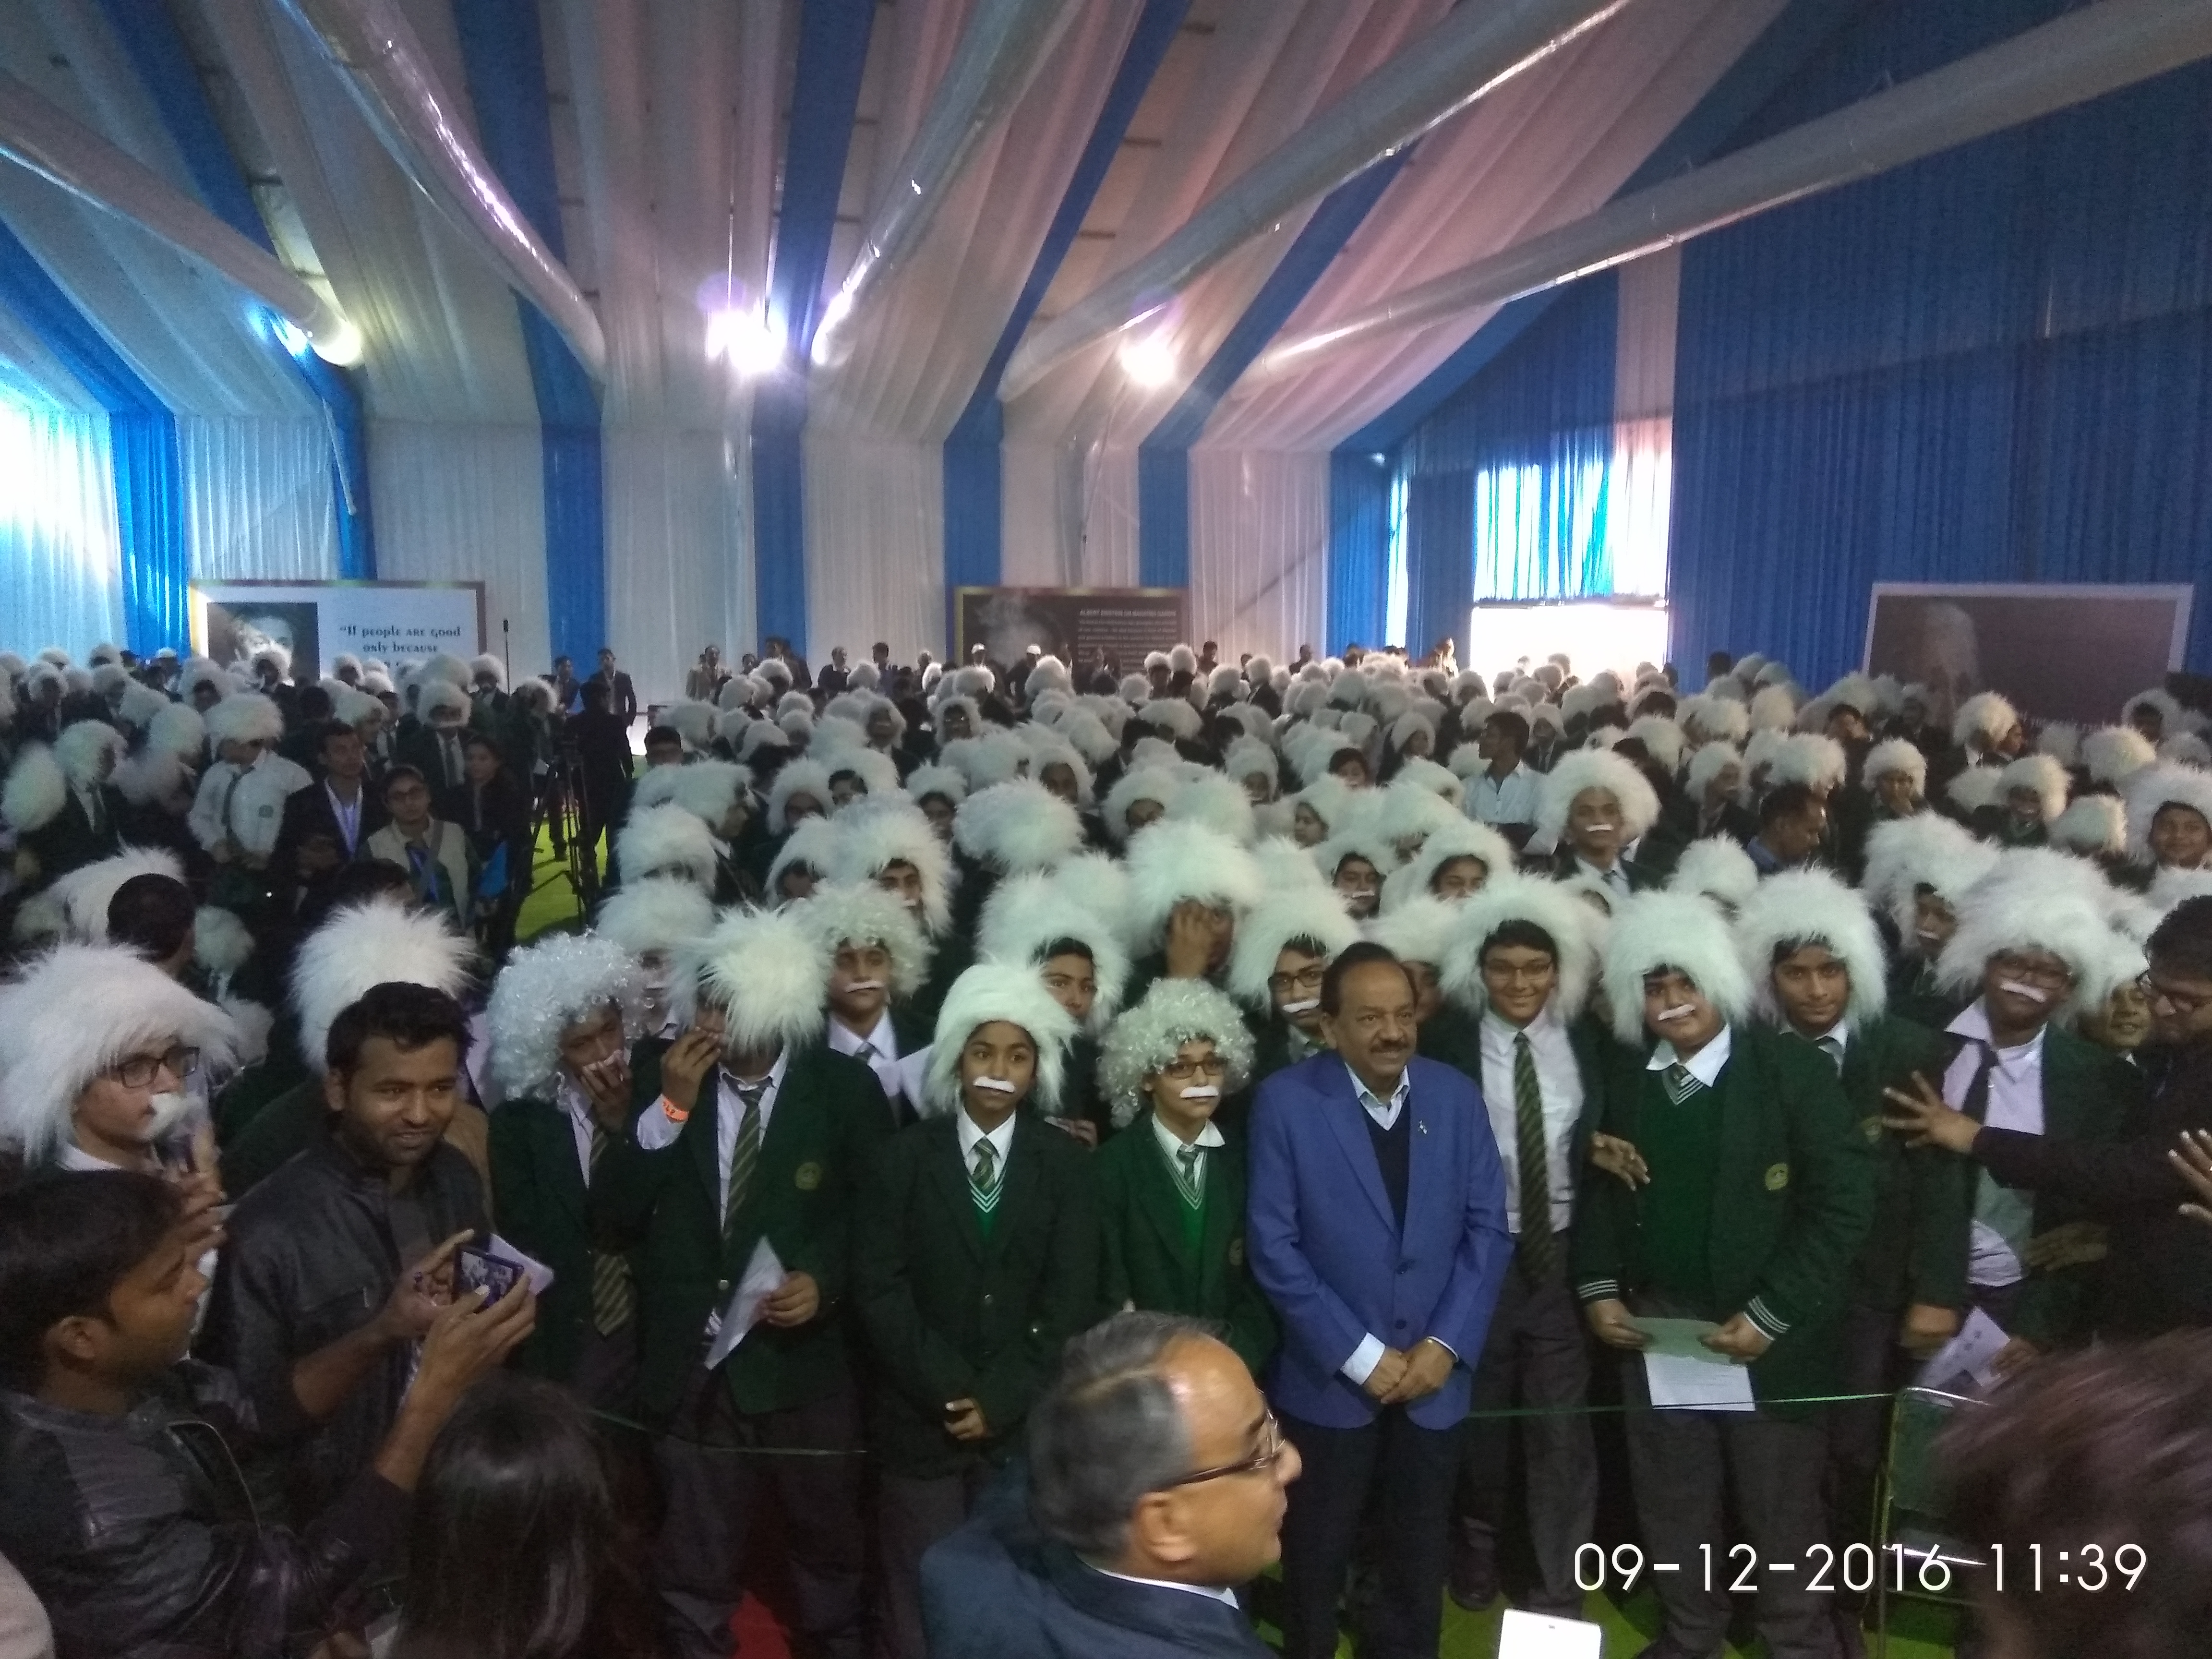  Hon'ble Minister of S&T &ES Dr Harsh Vardhan with 550 school students dressed up as Albert Einstein at IISF 2016